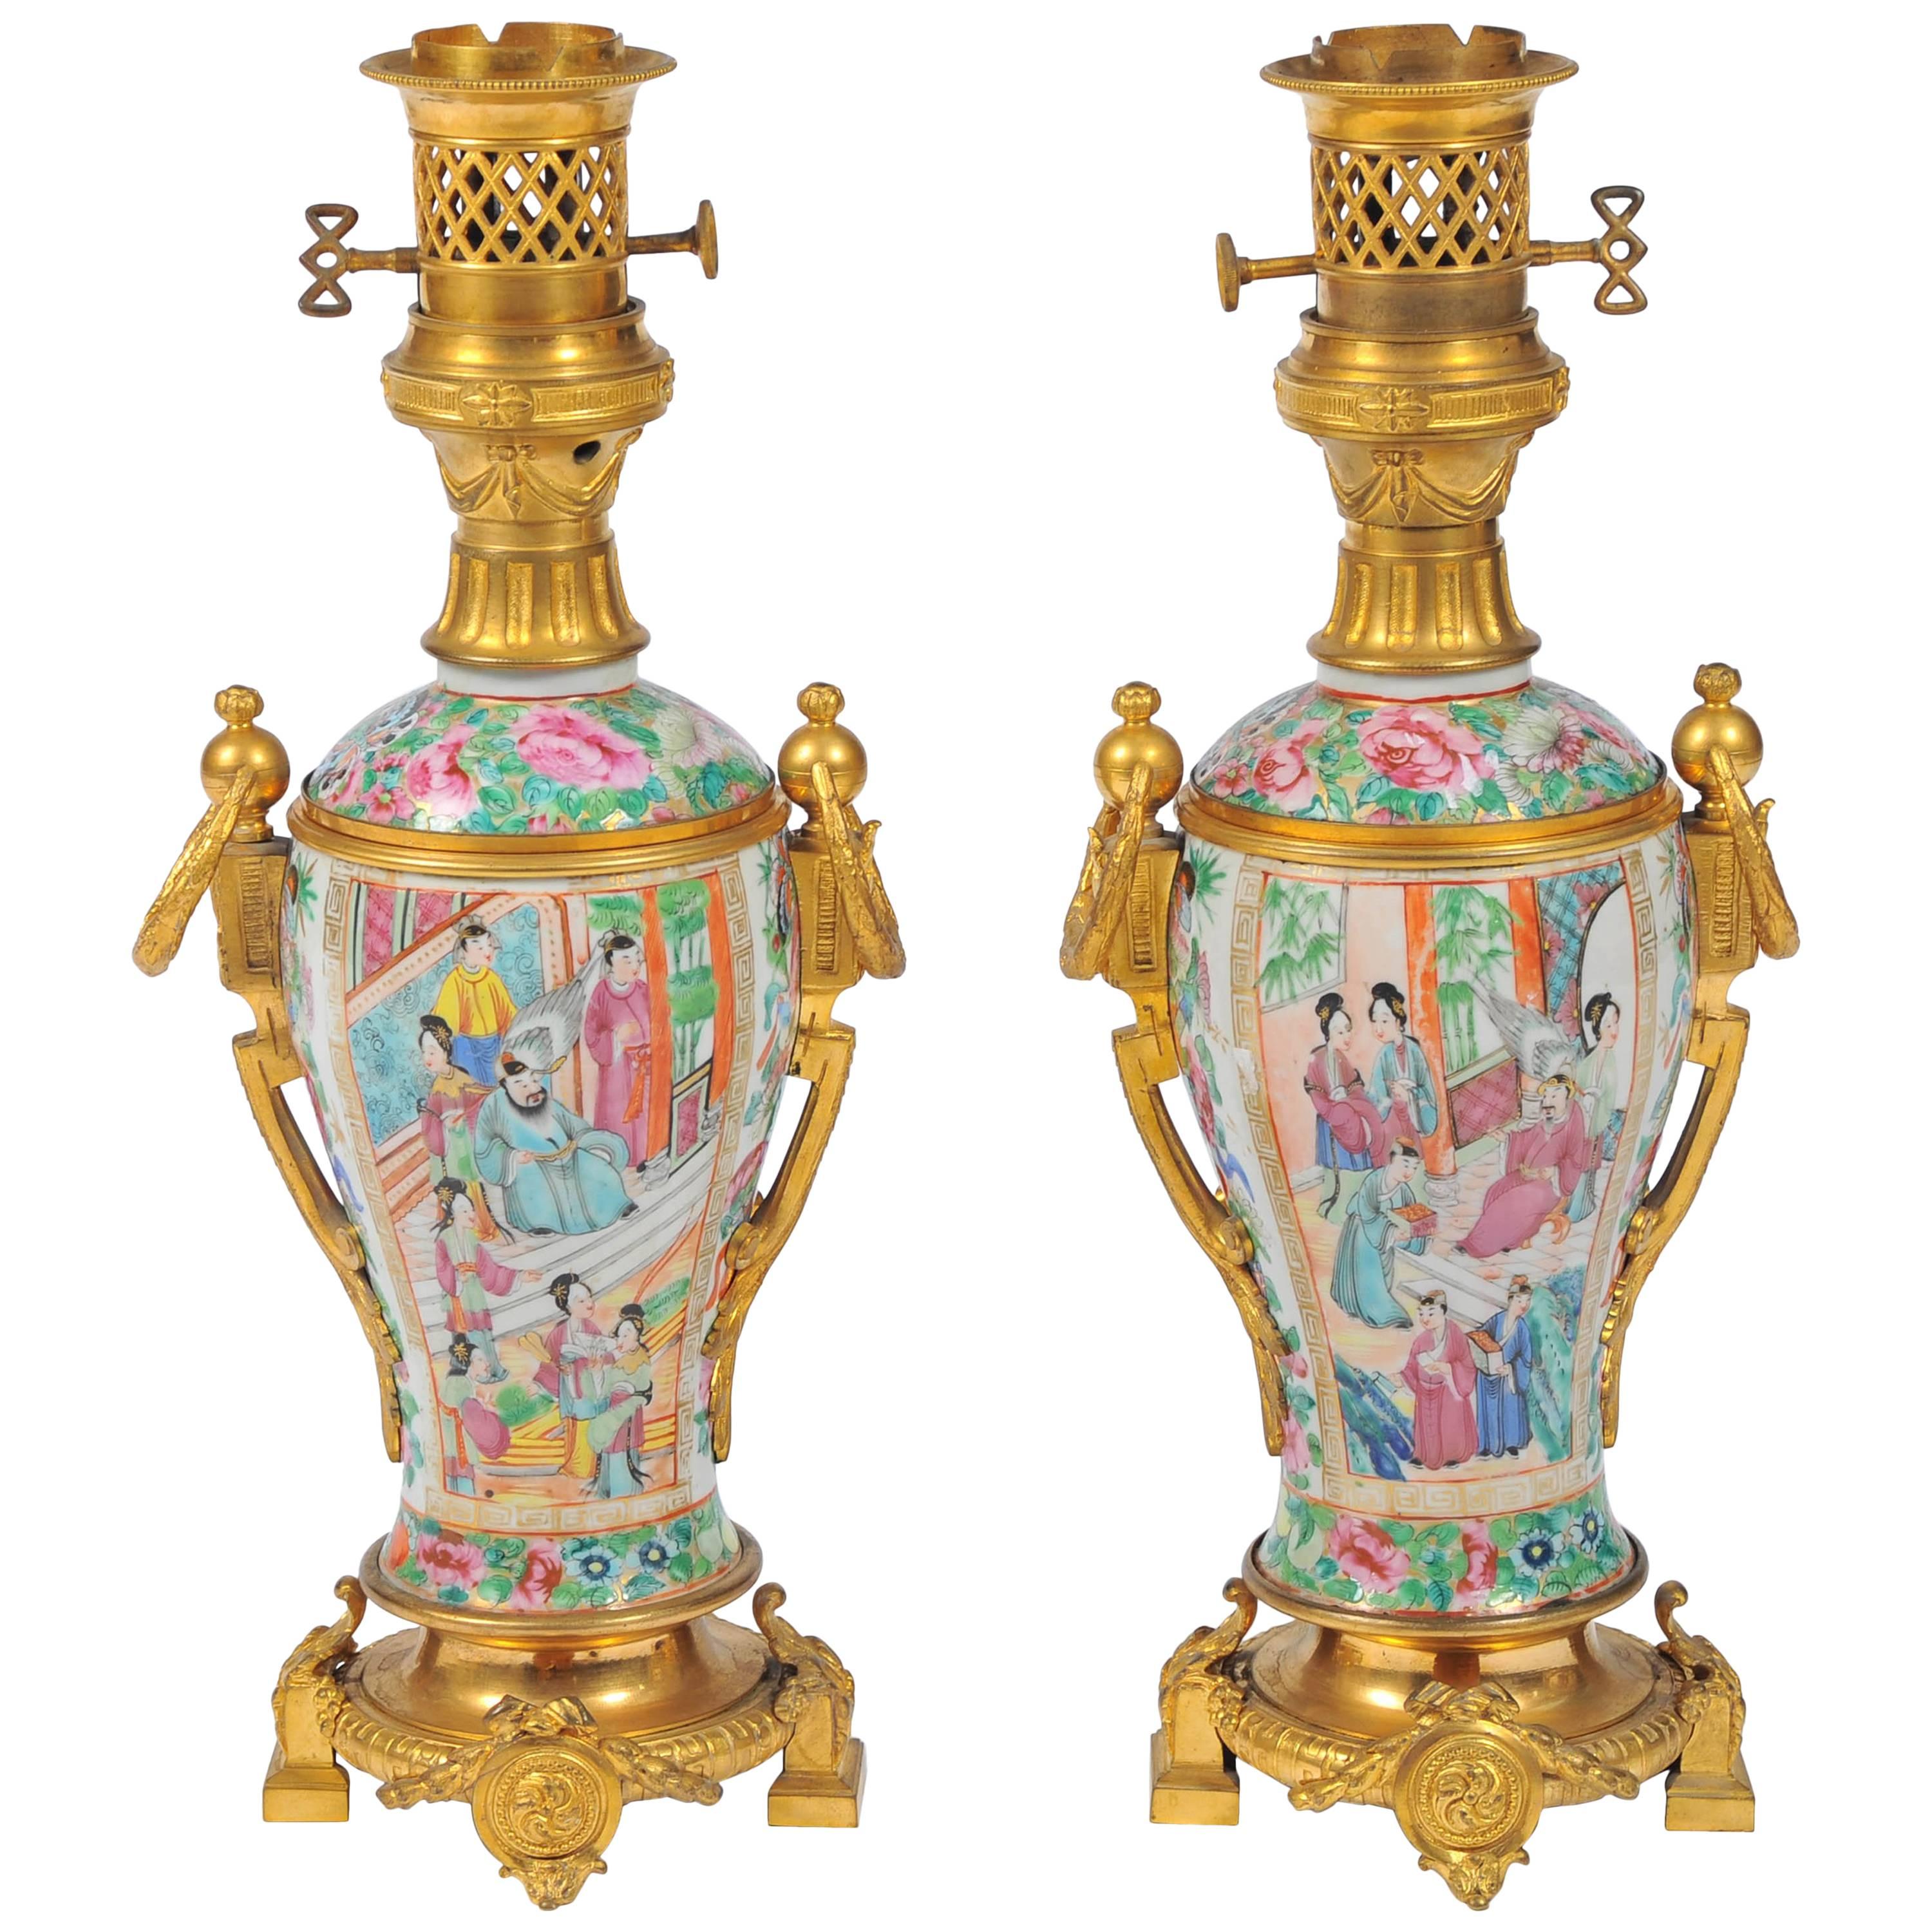 Pair of Rose Medallion Lamps, 19th Century